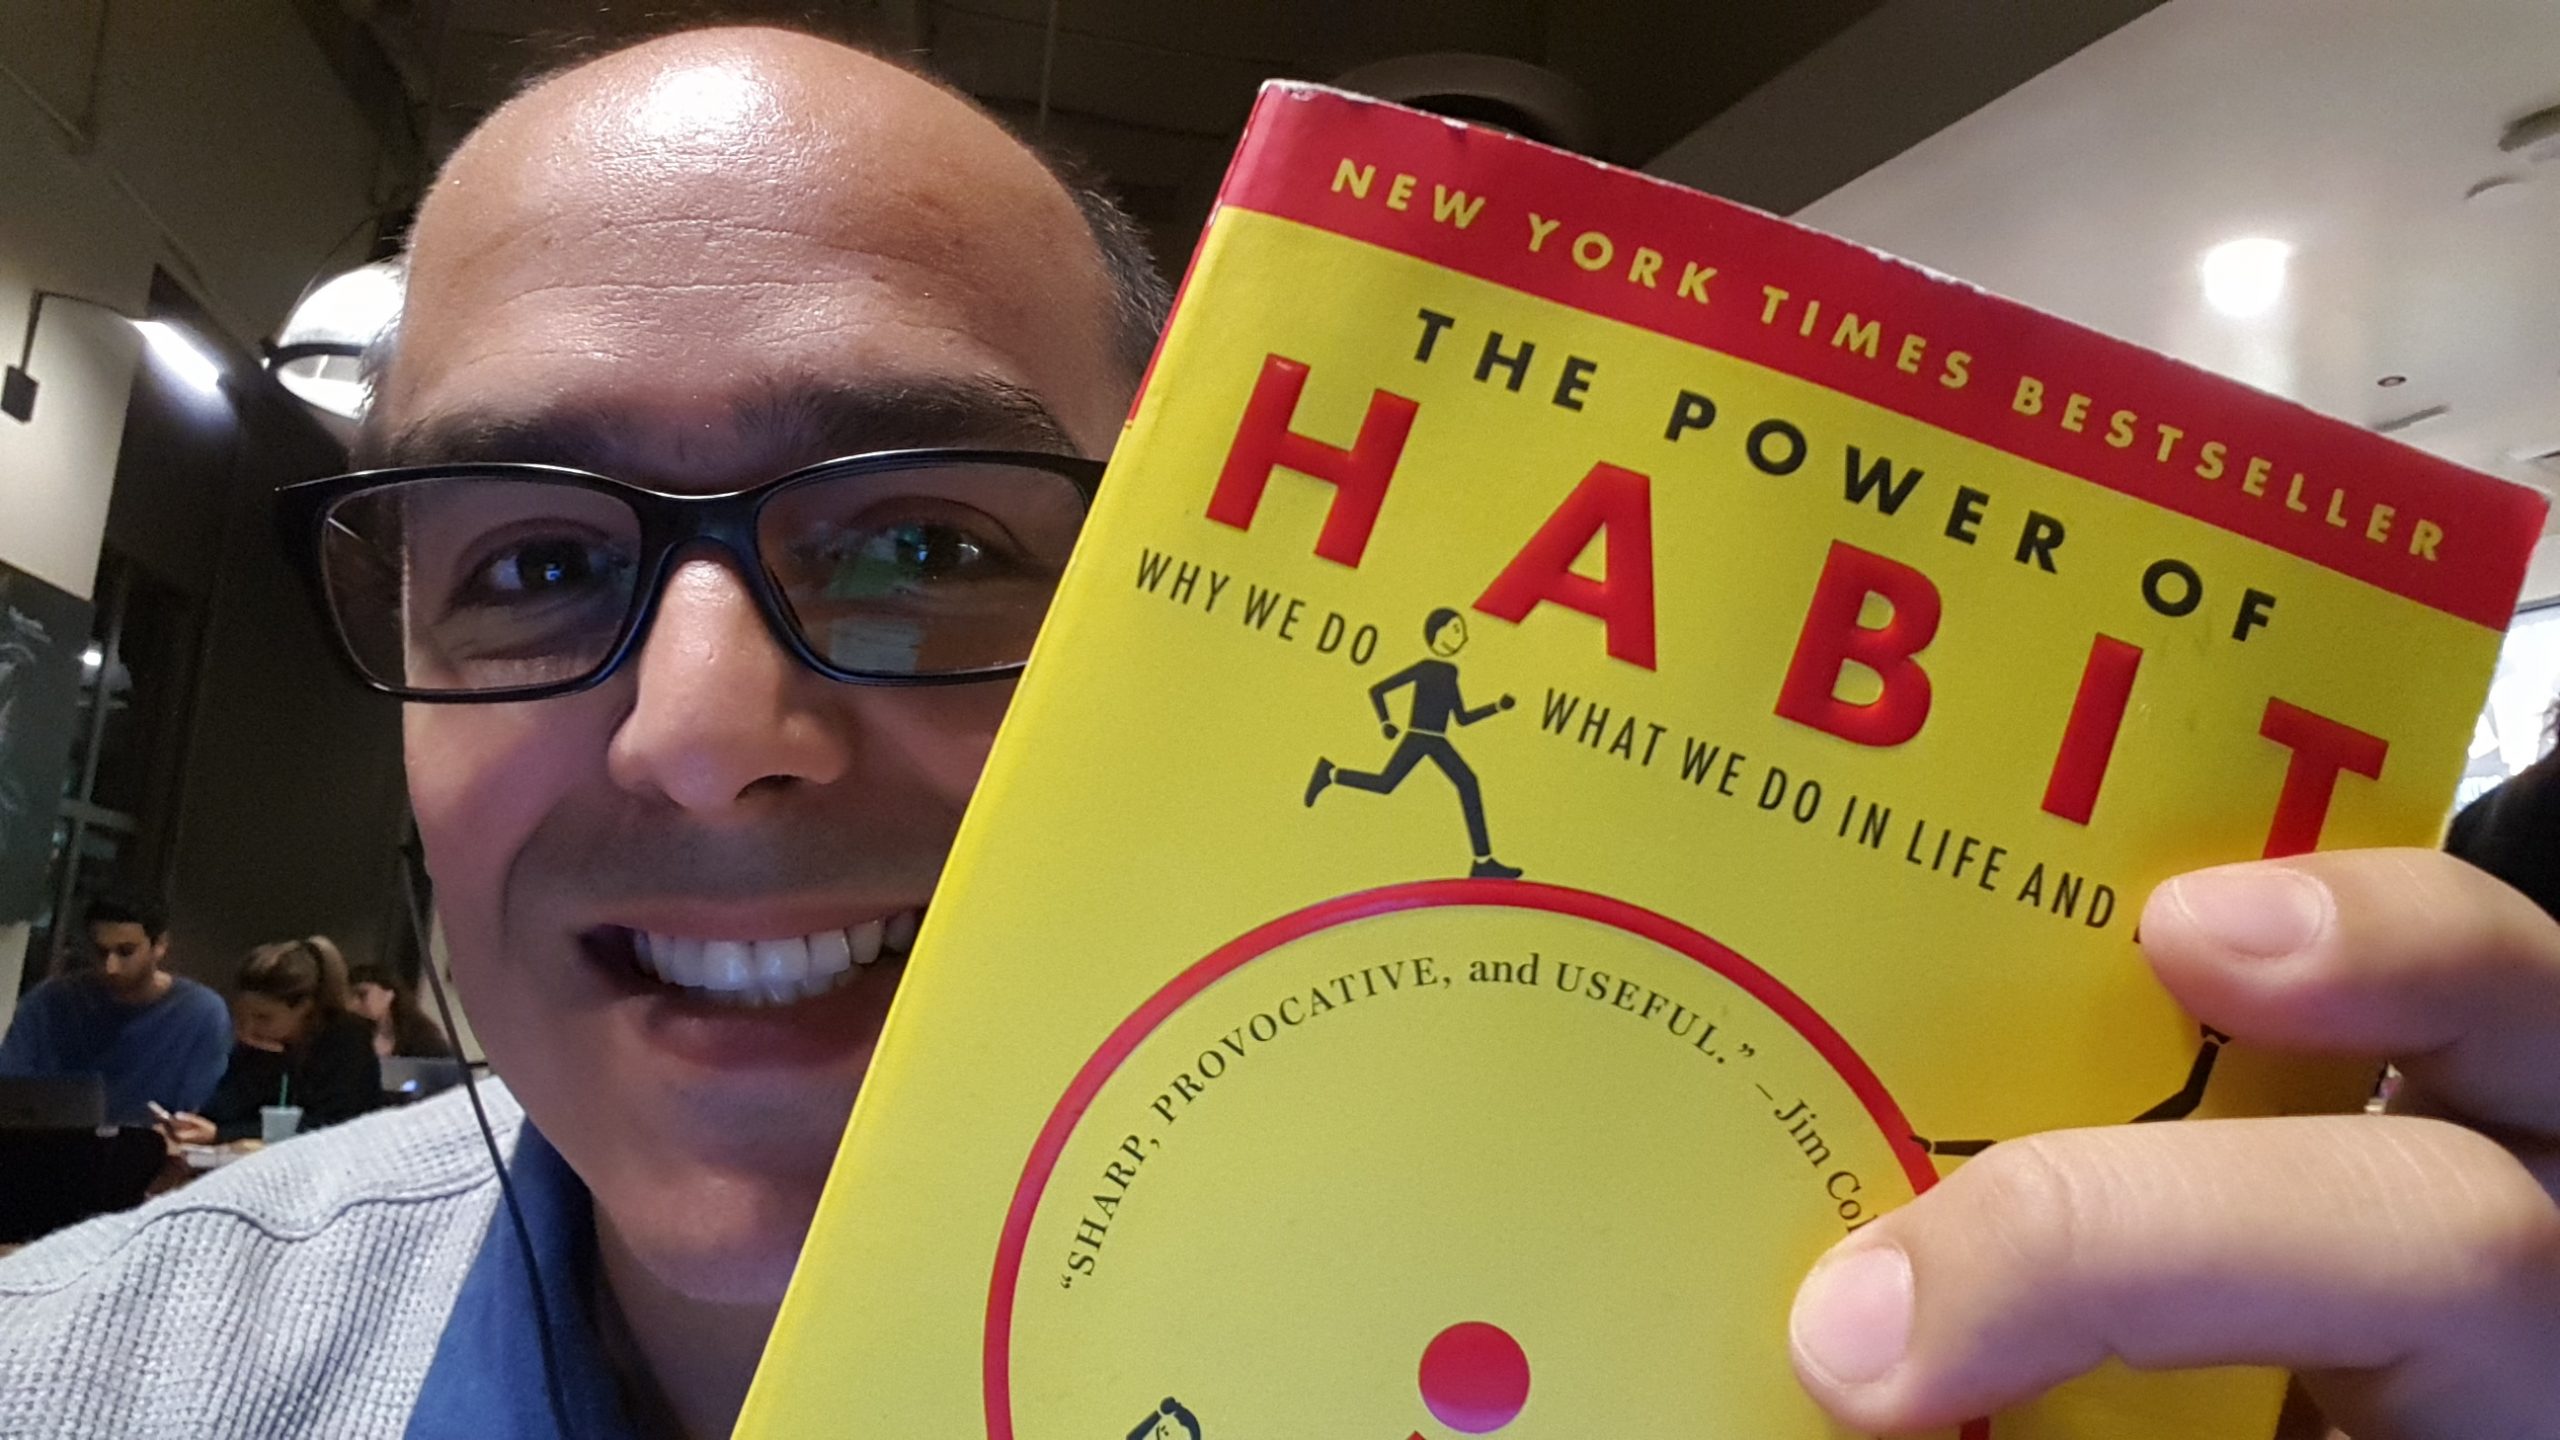 Picture of Oscar Gonzalez holding The Power of Habit book